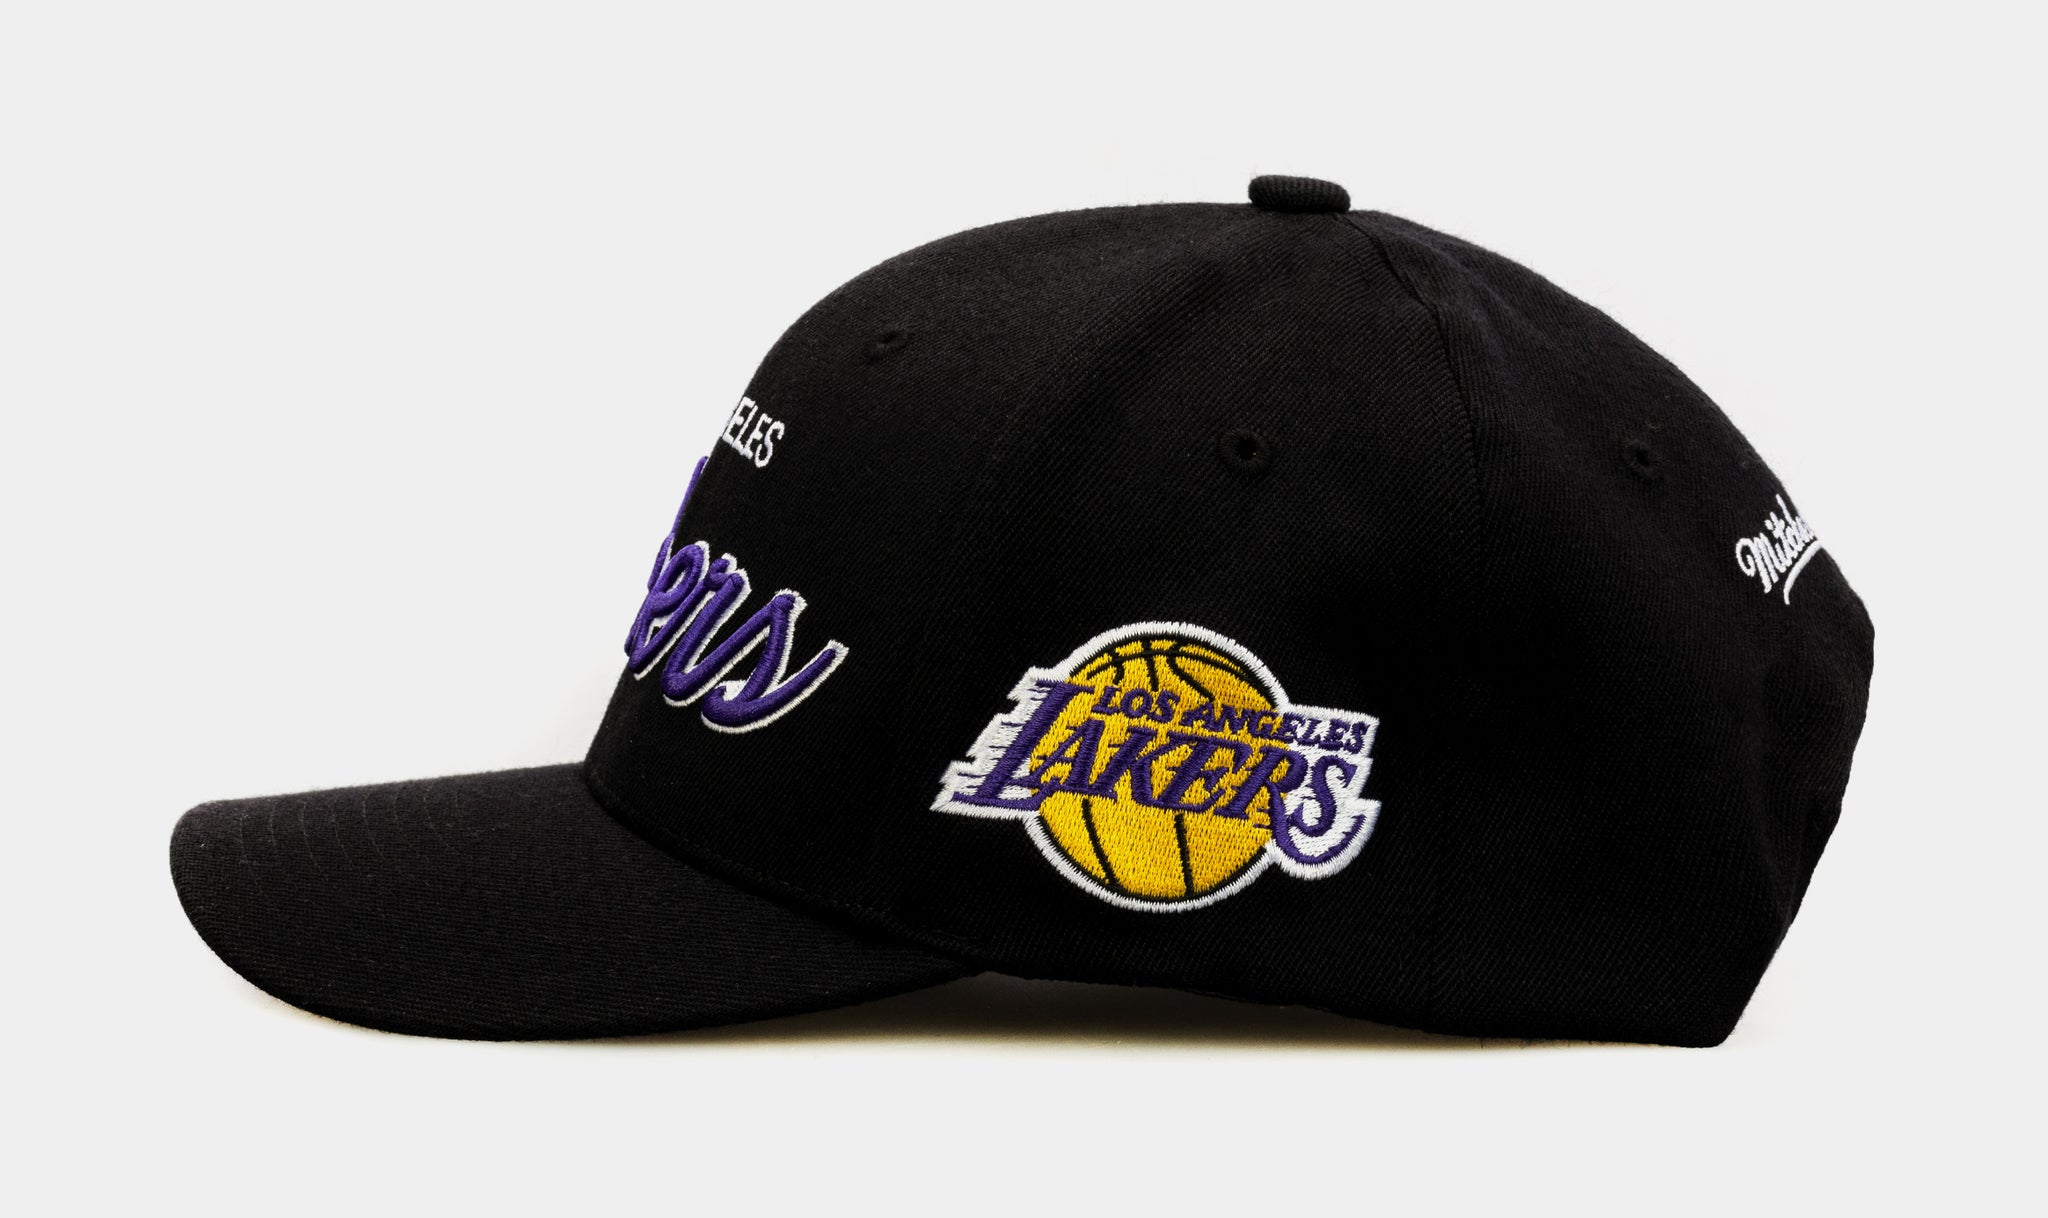 Mitchell & Ness LA Lakers Team Script Throwback snapback cap in white